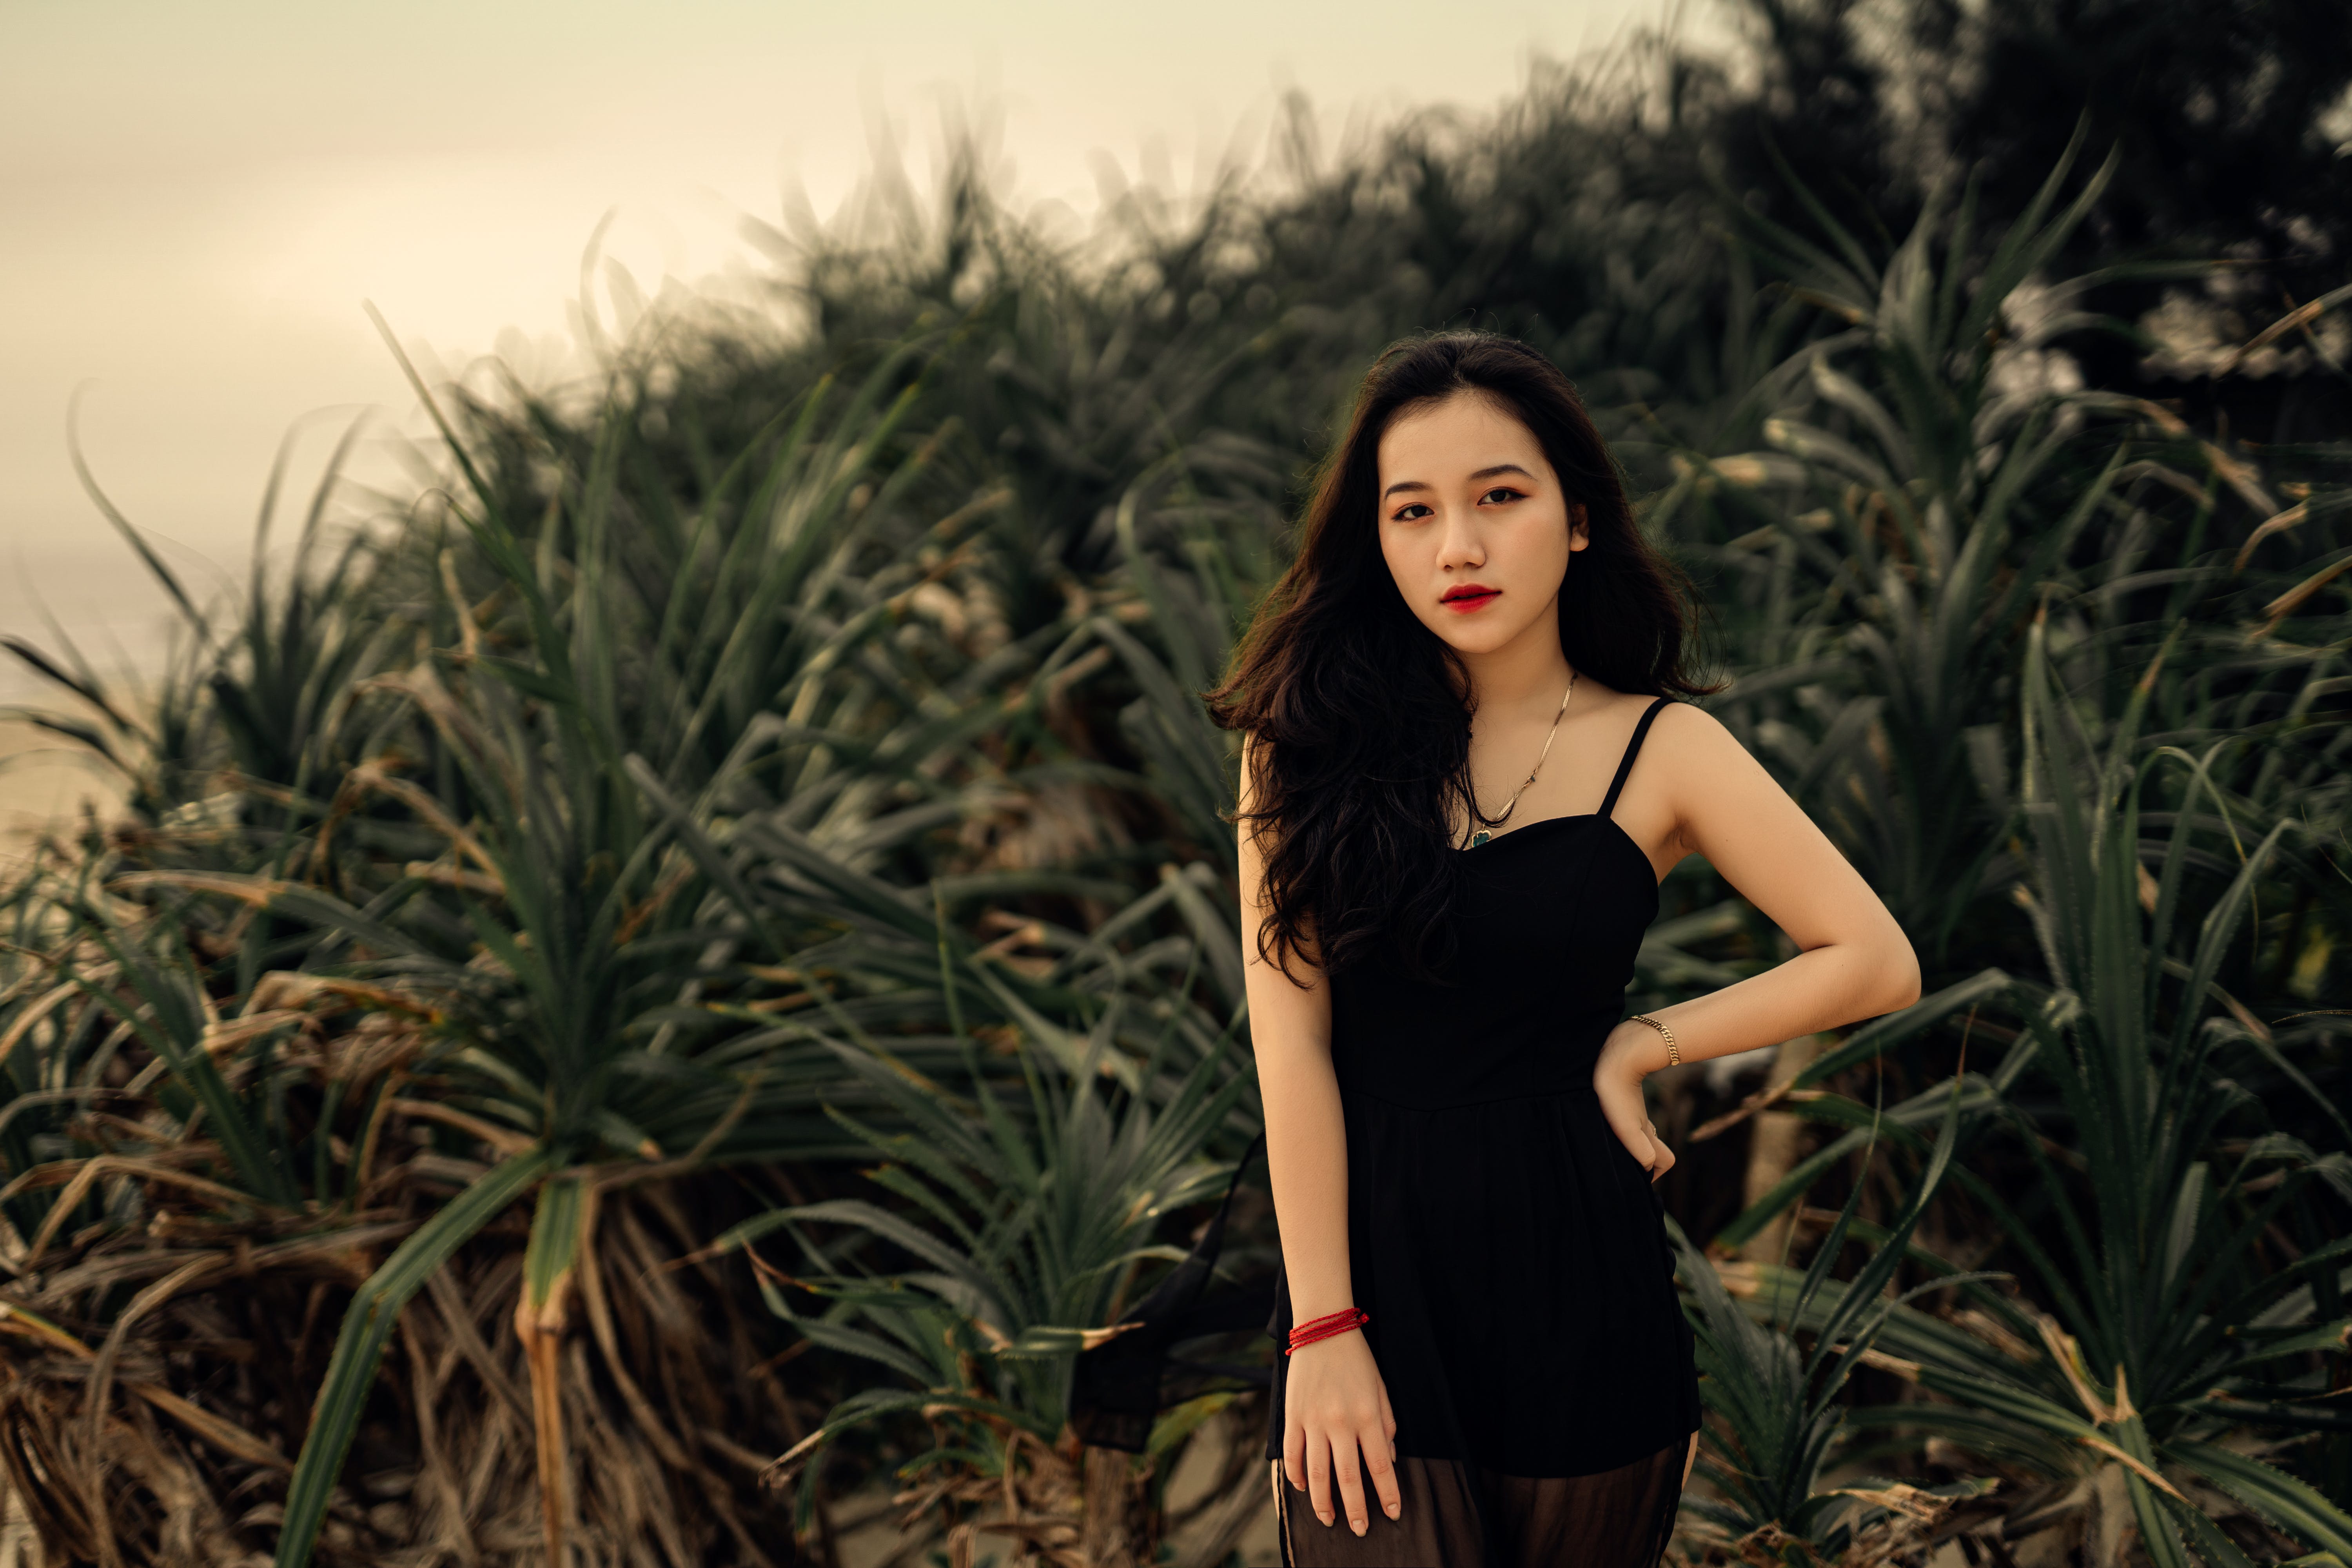 Asian woman in a little black dress wearing fashion jewelry pieces, standing among plants